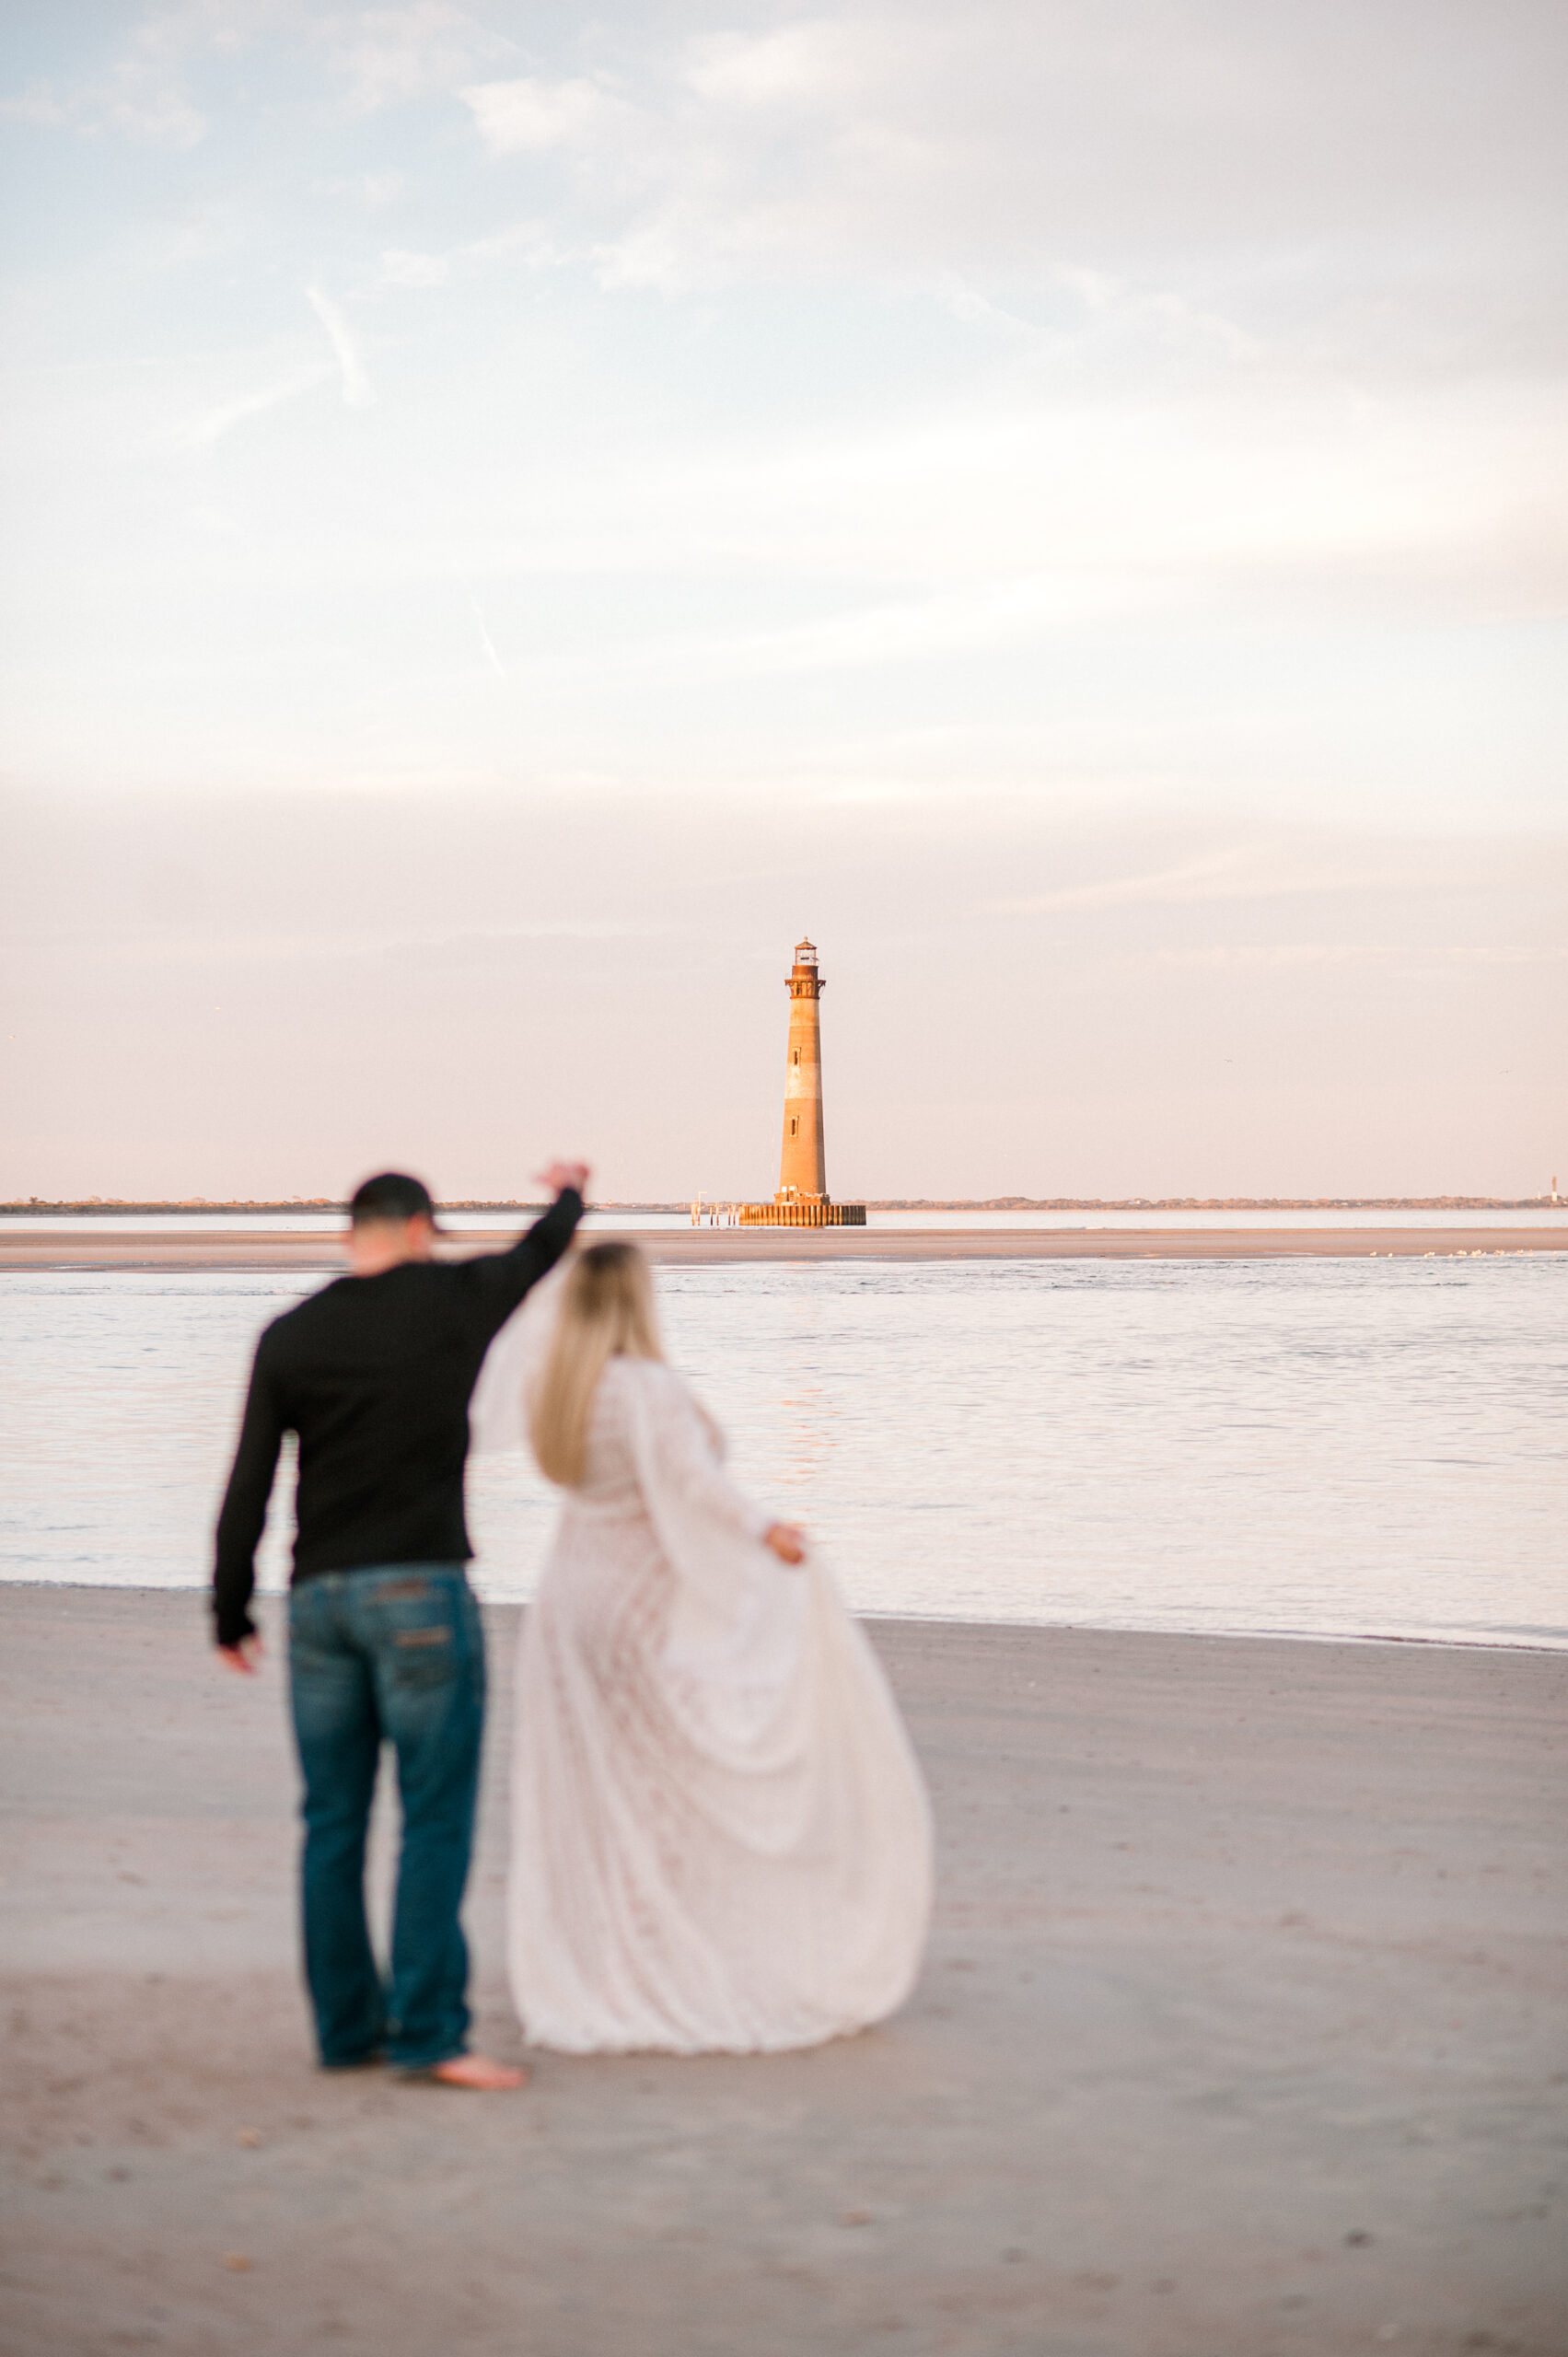 Photo of a lighthouse on the water at sunset with new parents blurred in the photo thinking of Reflections OBGYN. 